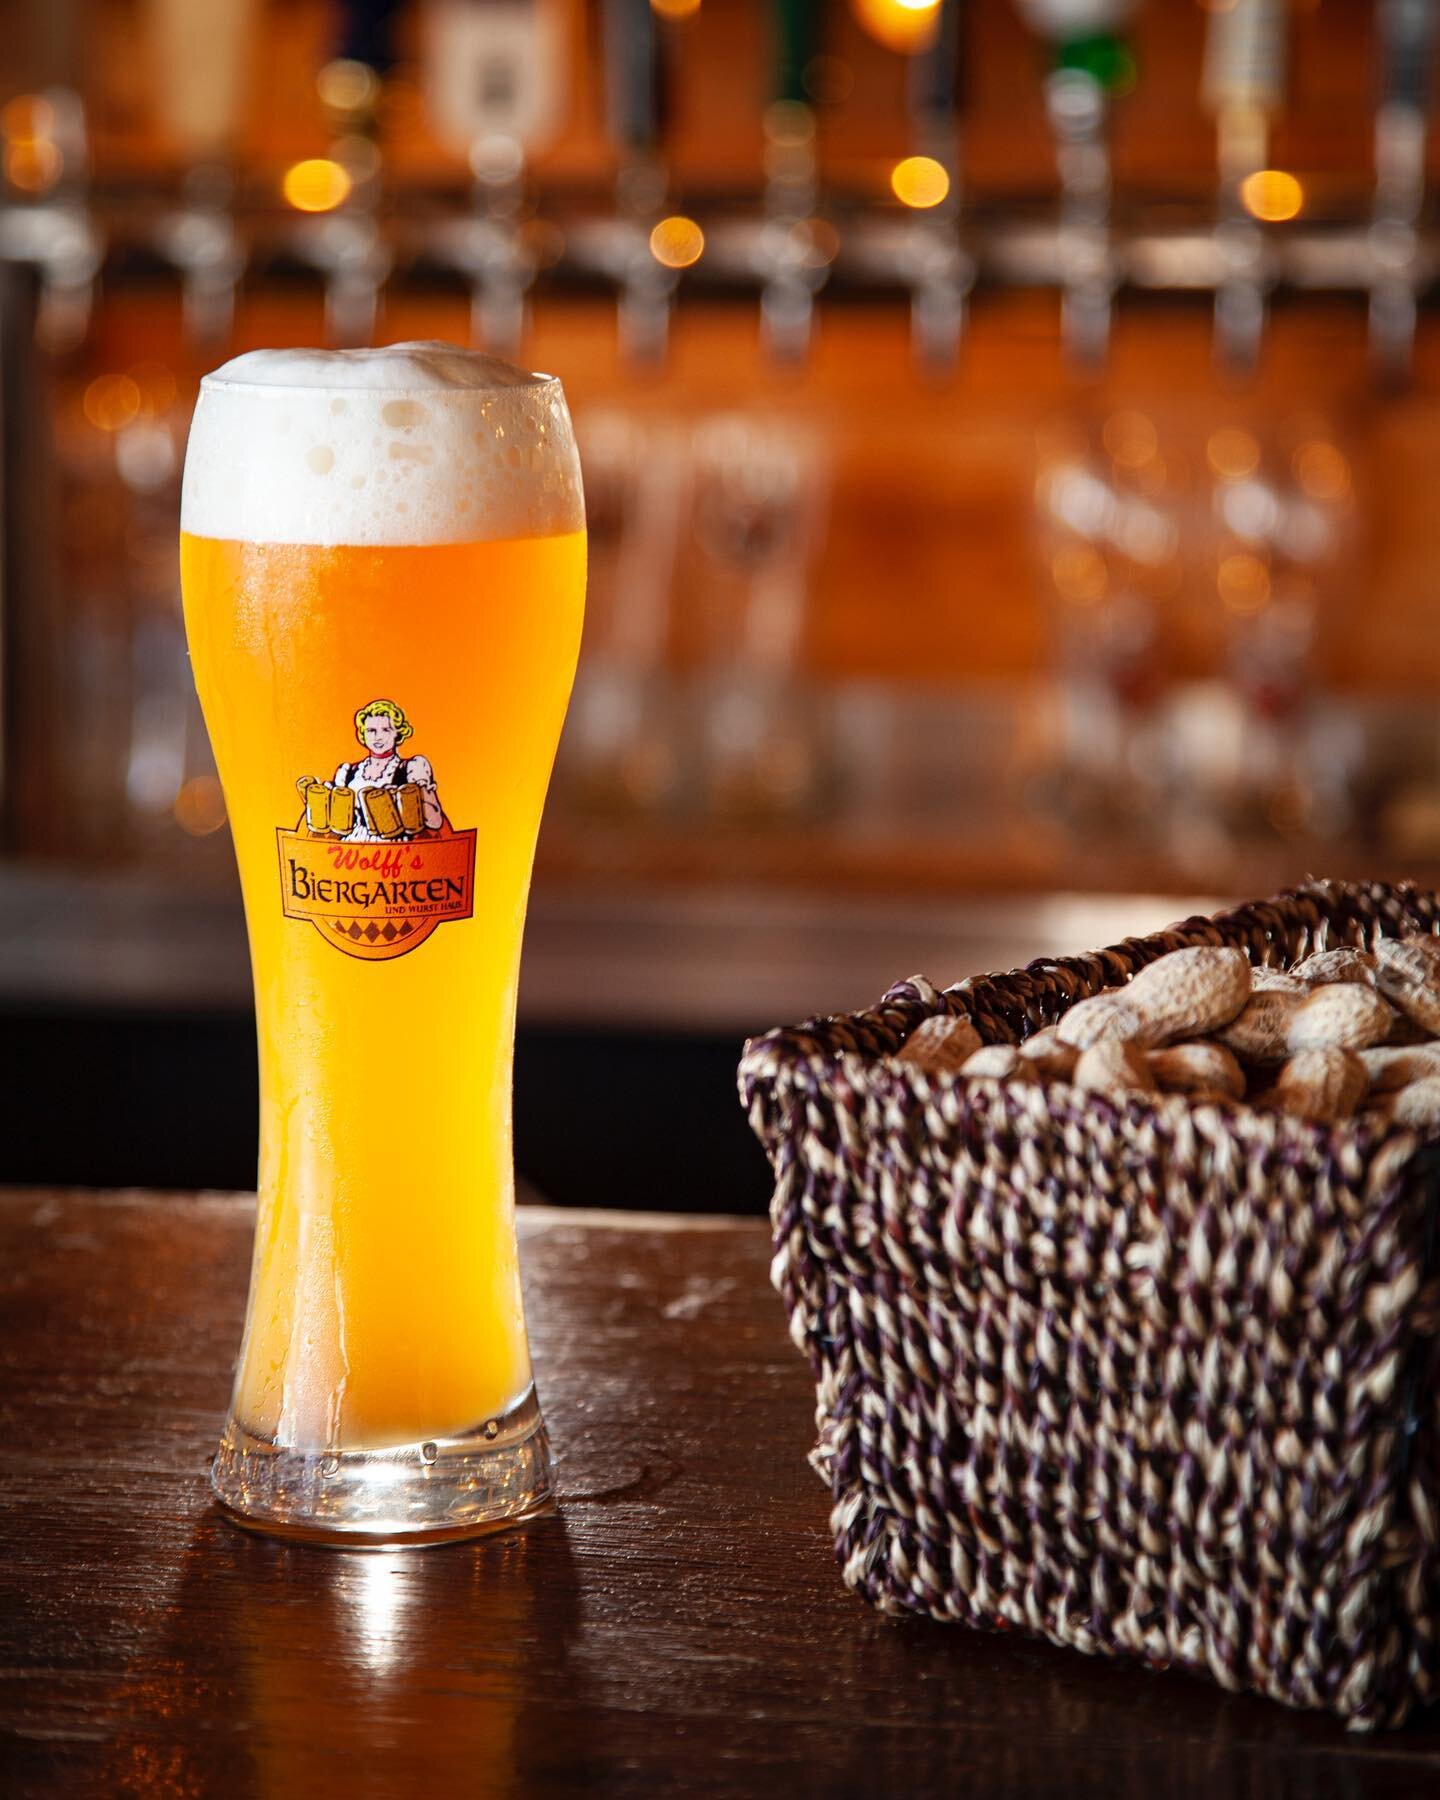 National bier day? We&rsquo;ve got you. Come on by for $2 off half liter happy hour biers from 4-7pm.